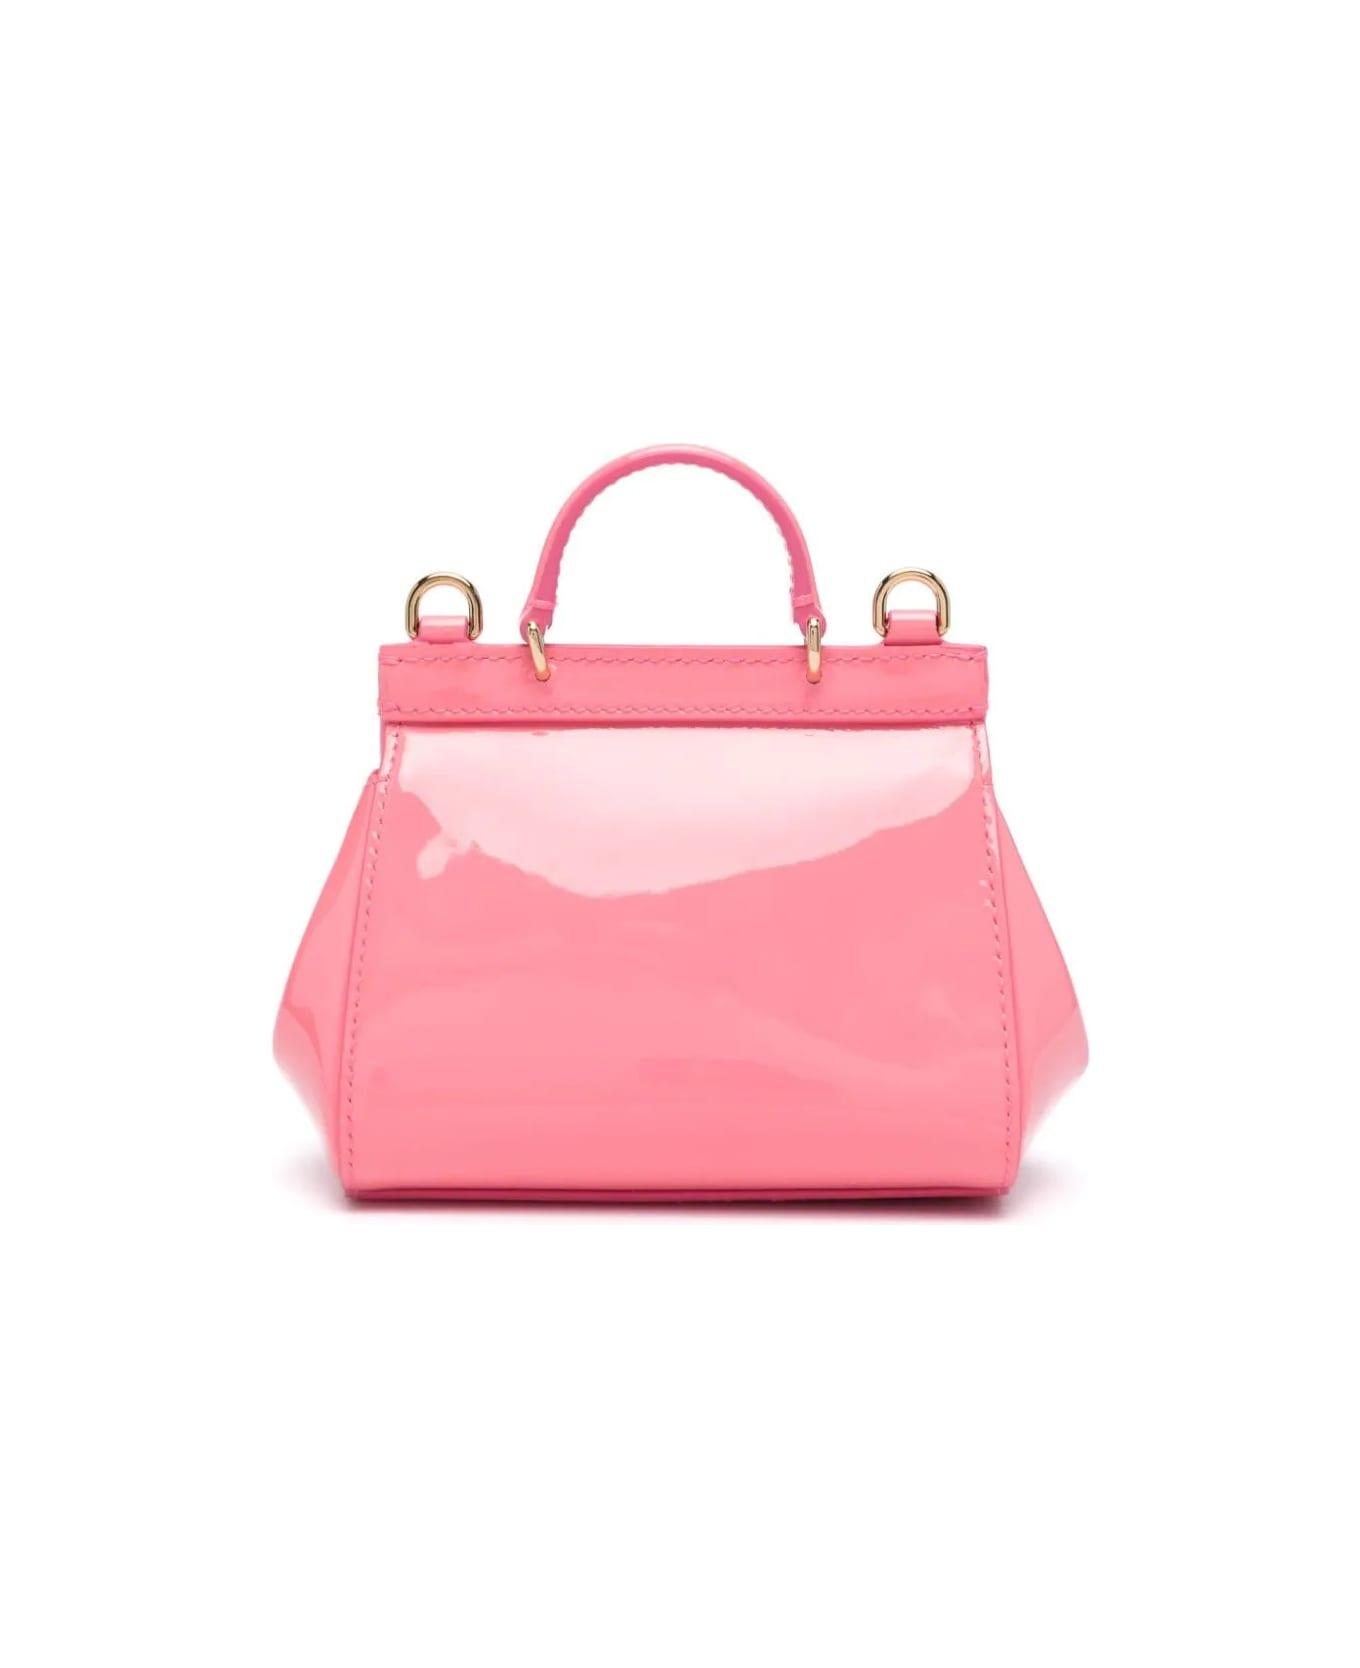 Dolce & Gabbana Mini Sicily Bag In Pink Patent Leather - Pink